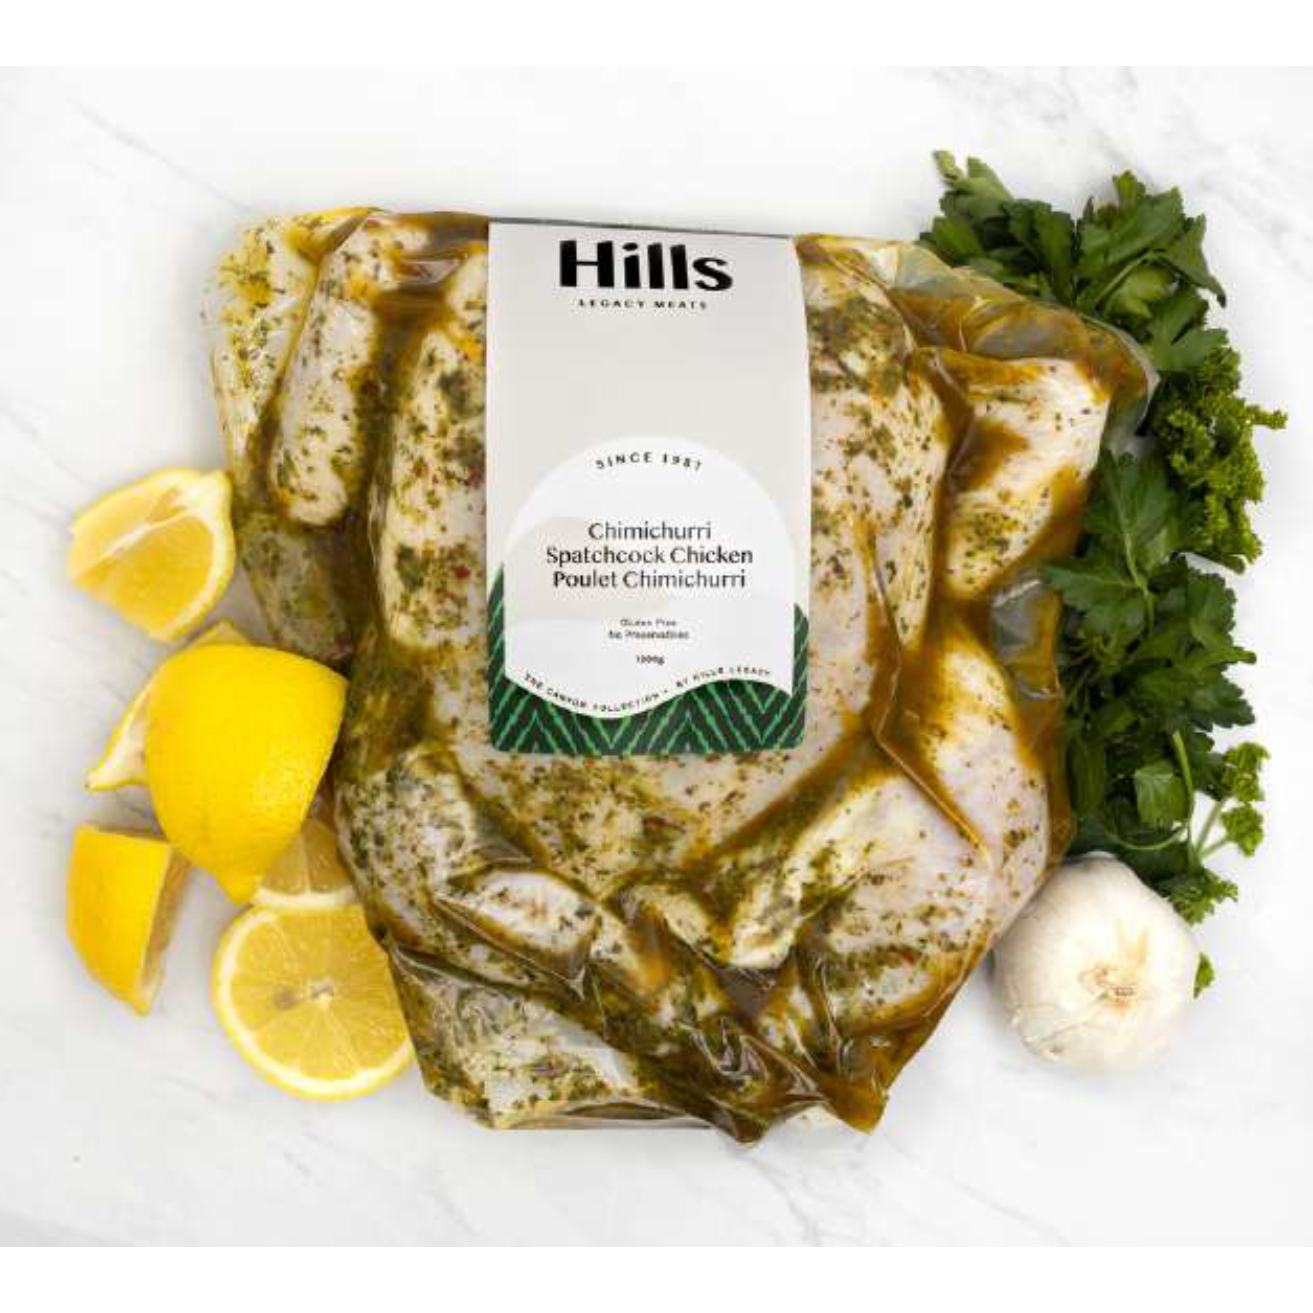 Chimichurri Spatchcock Whole Chicken